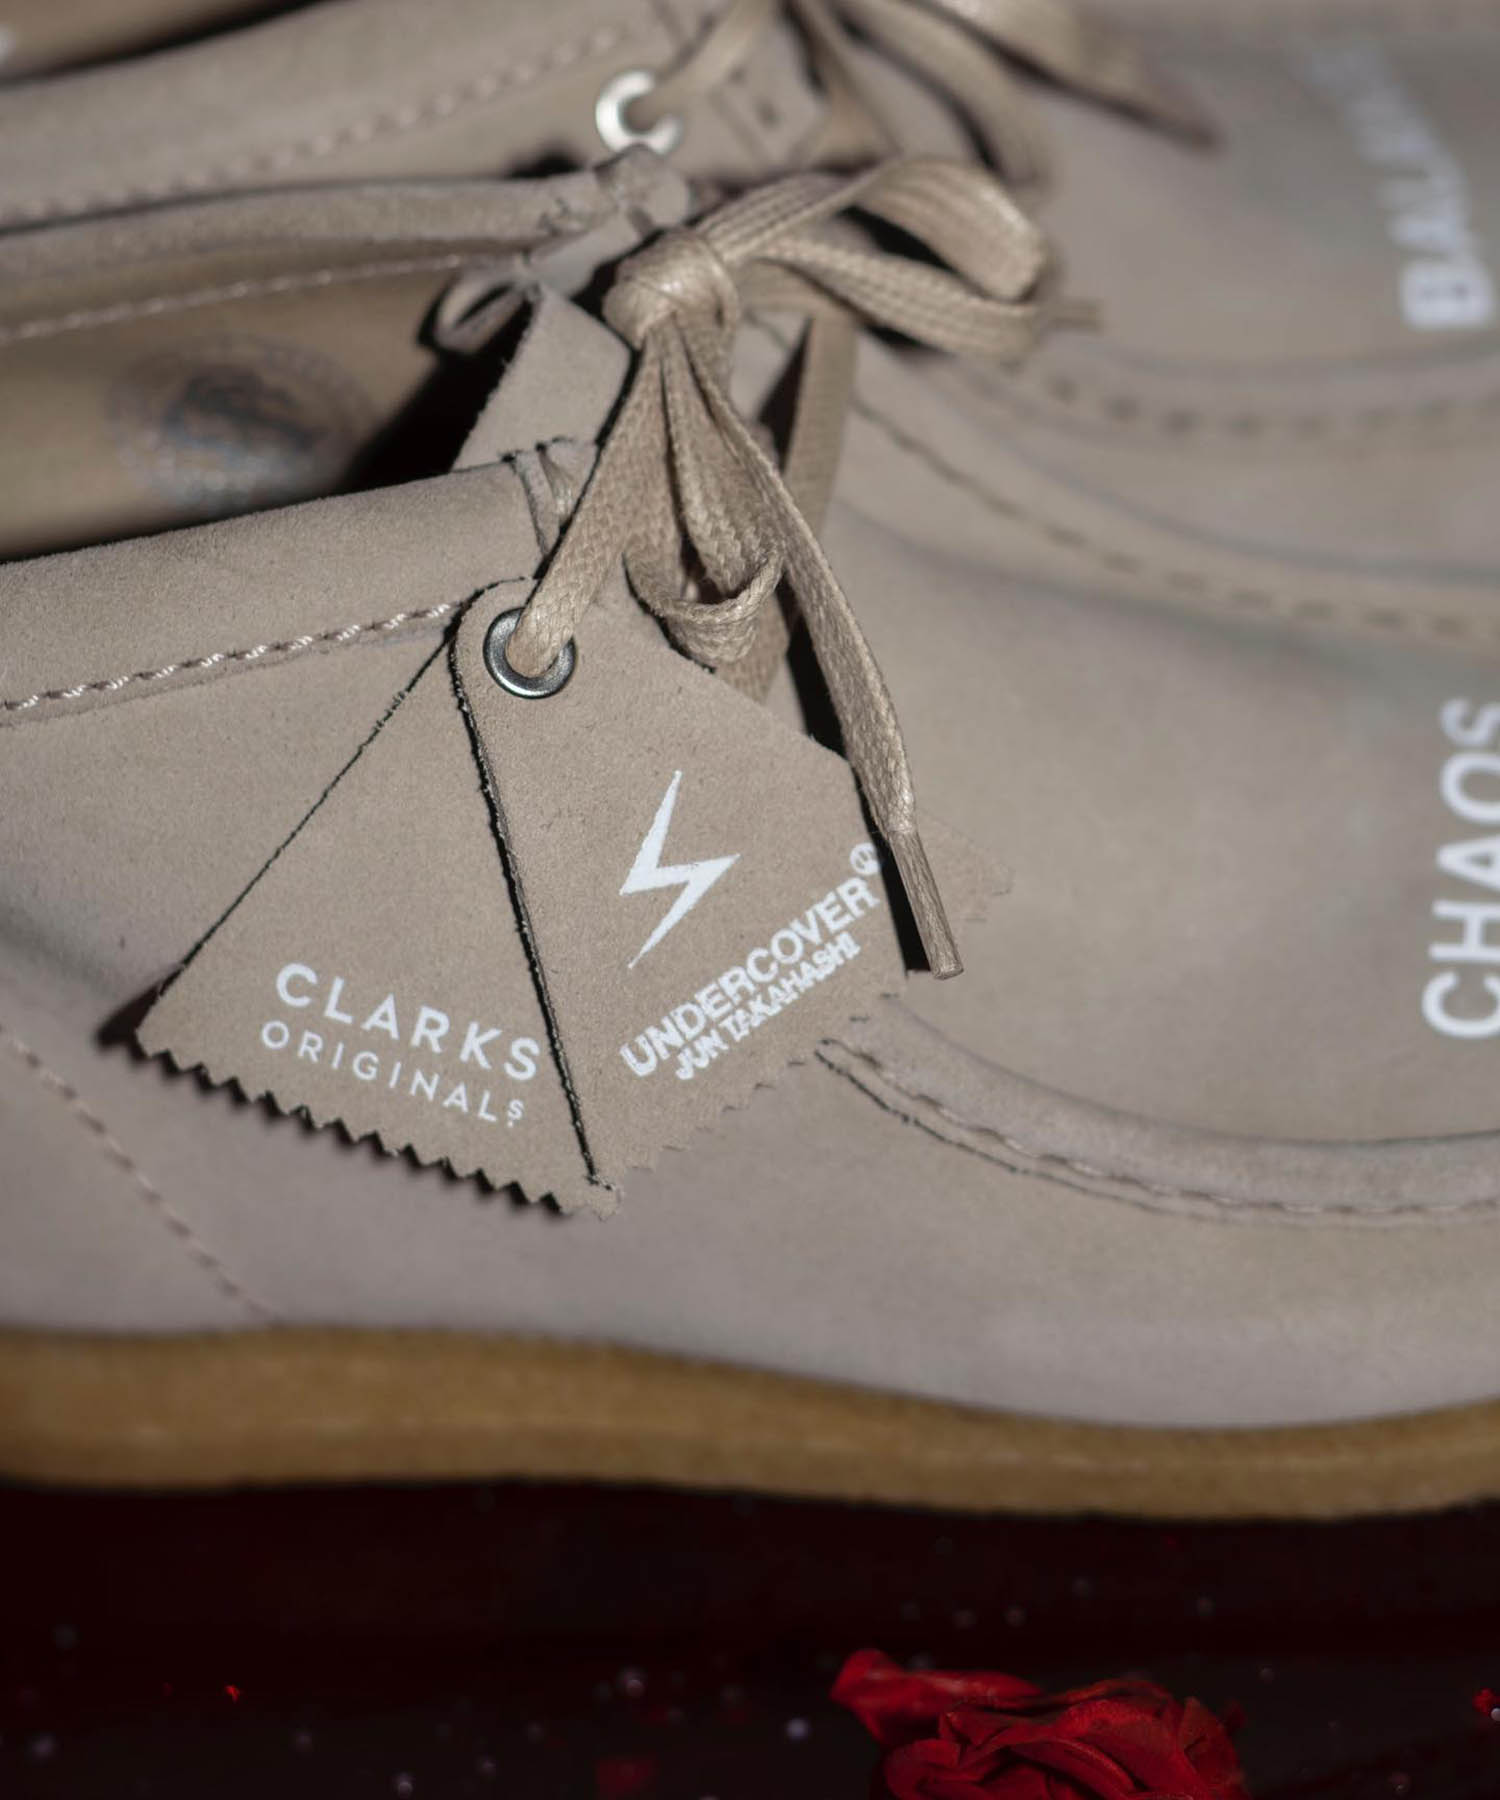 Clarks Wallabee Boots UNDERCOVER